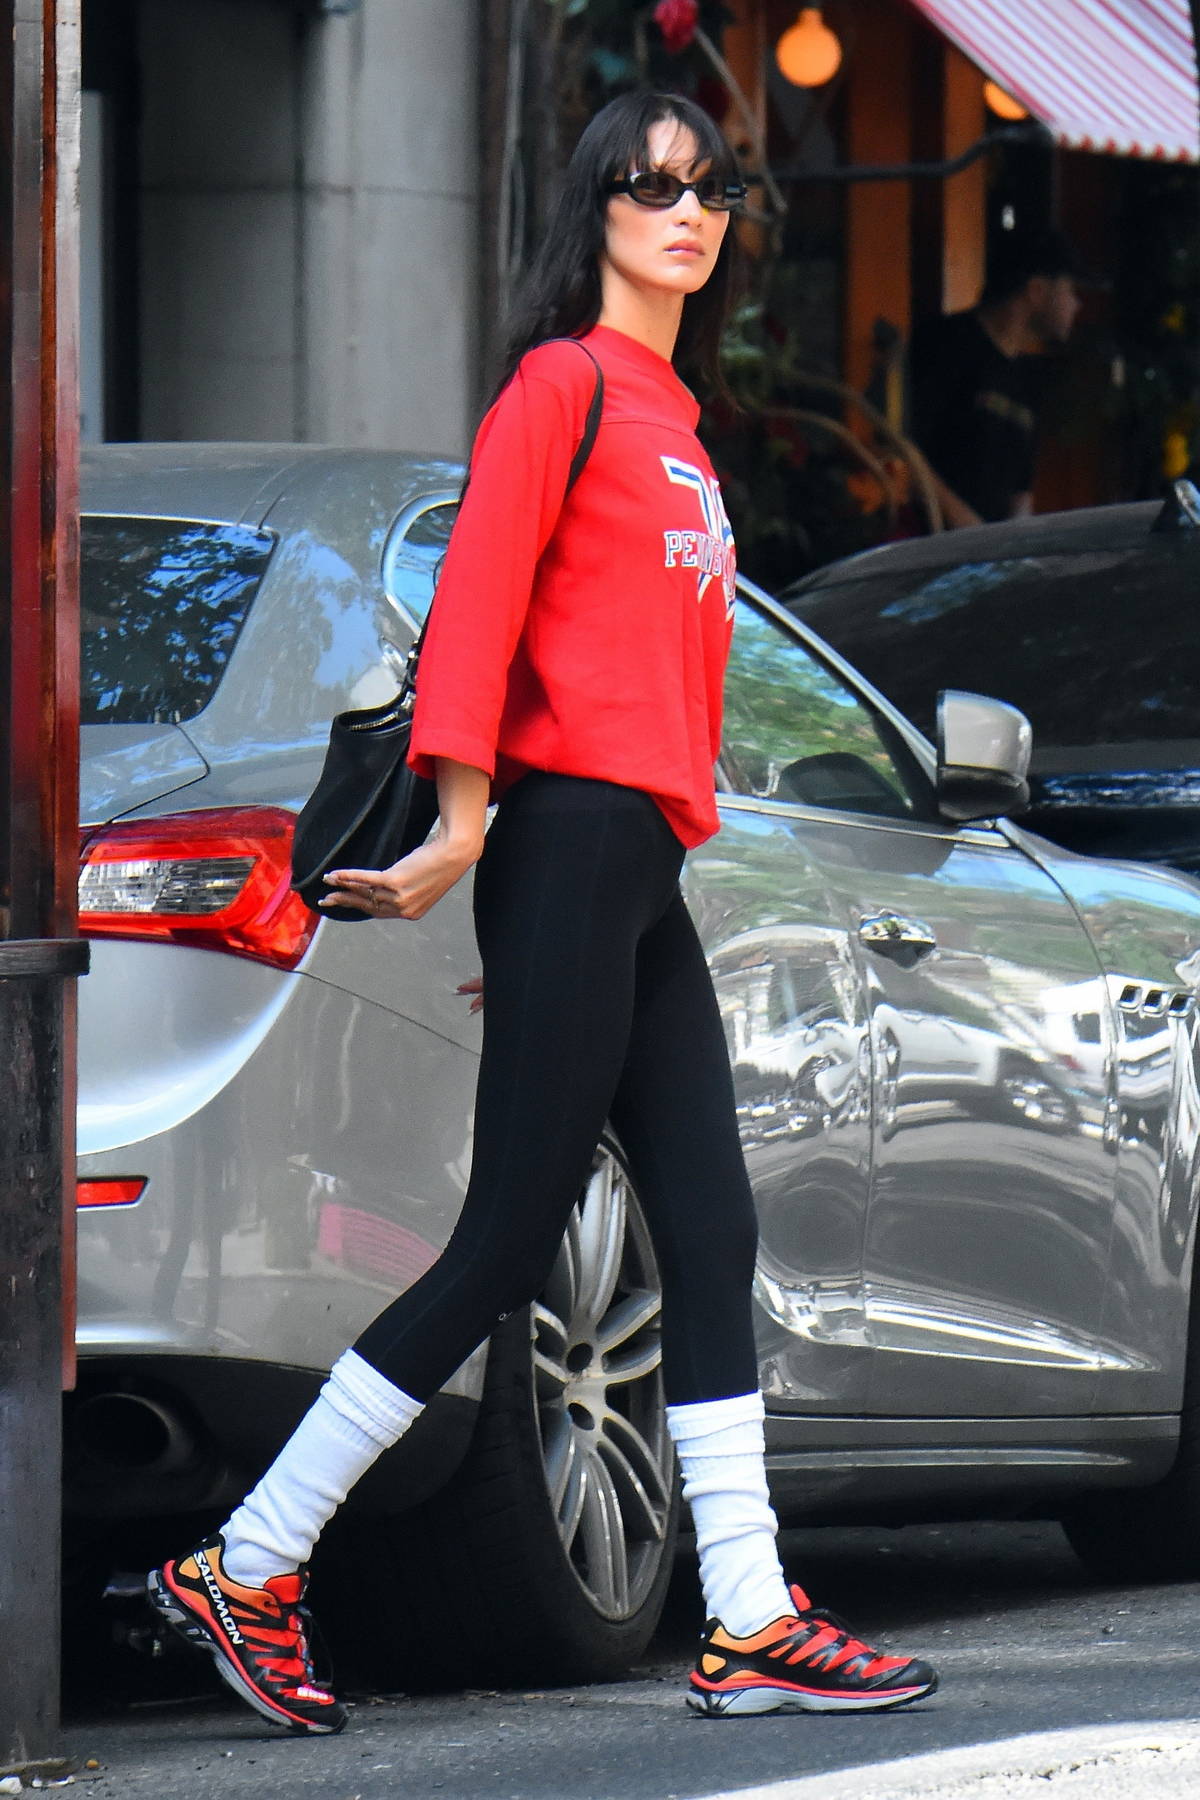 https://www.celebsfirst.com/wp-content/uploads/2022/08/bella-hadid-wears-a-bright-red-sweater-and-black-leggings-while-out-on-an-afternoon-stroll-through-manhattan-in-new-york-city-050822_2.jpg